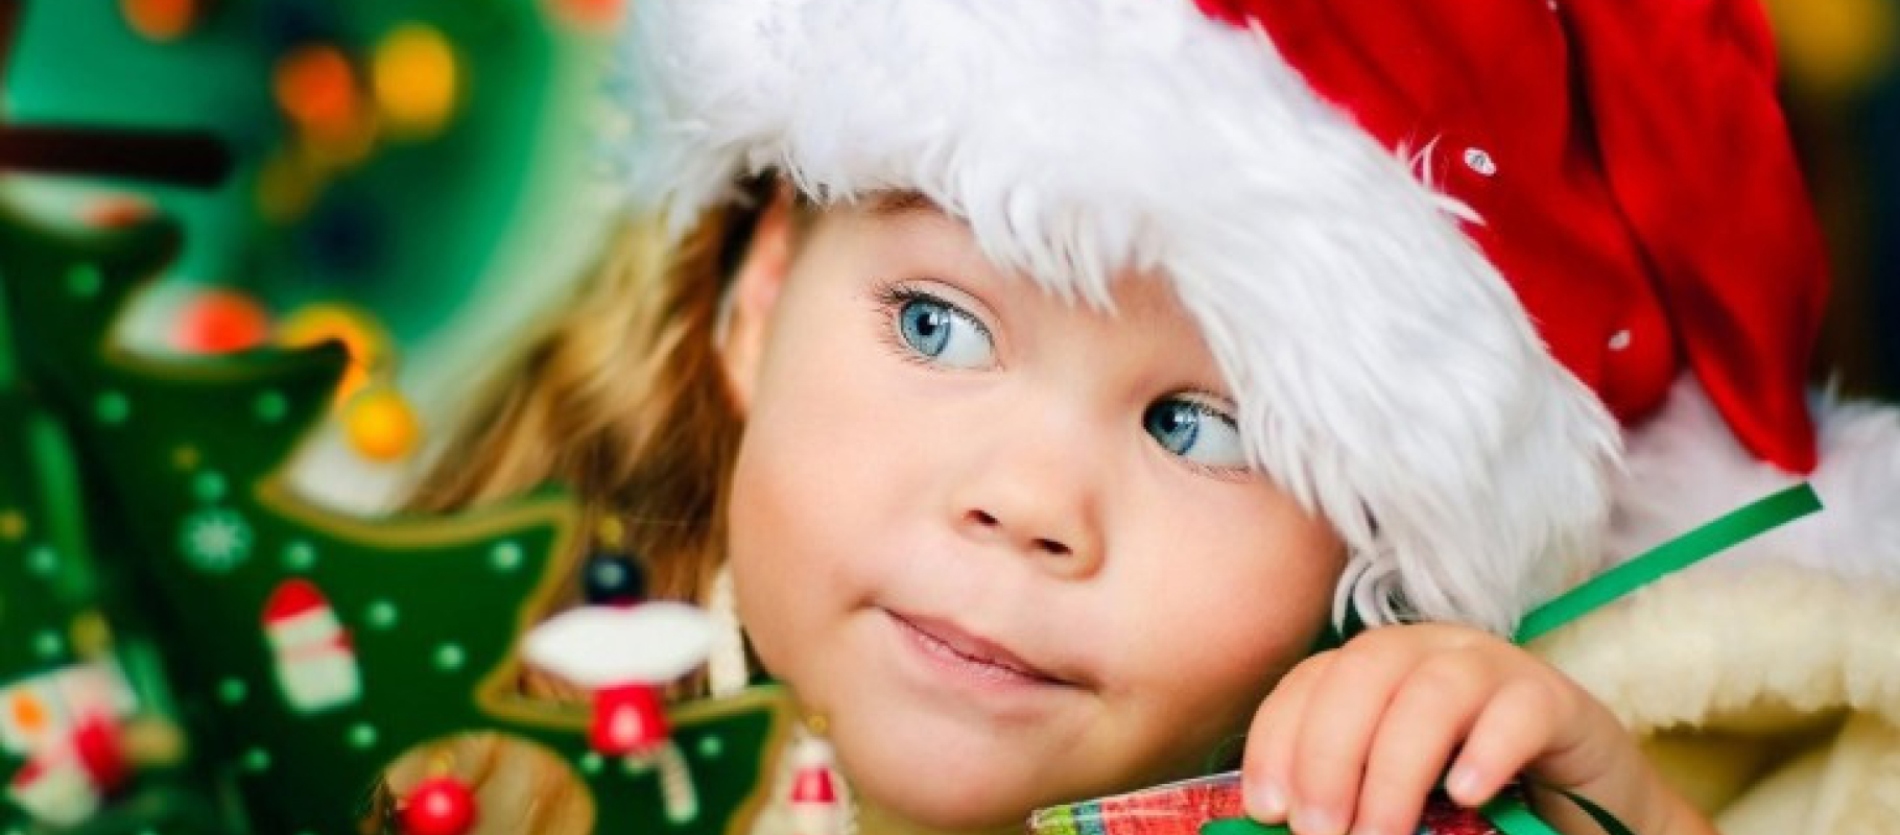 A young girl wearing a Christmas hat looking at Christmas decorations